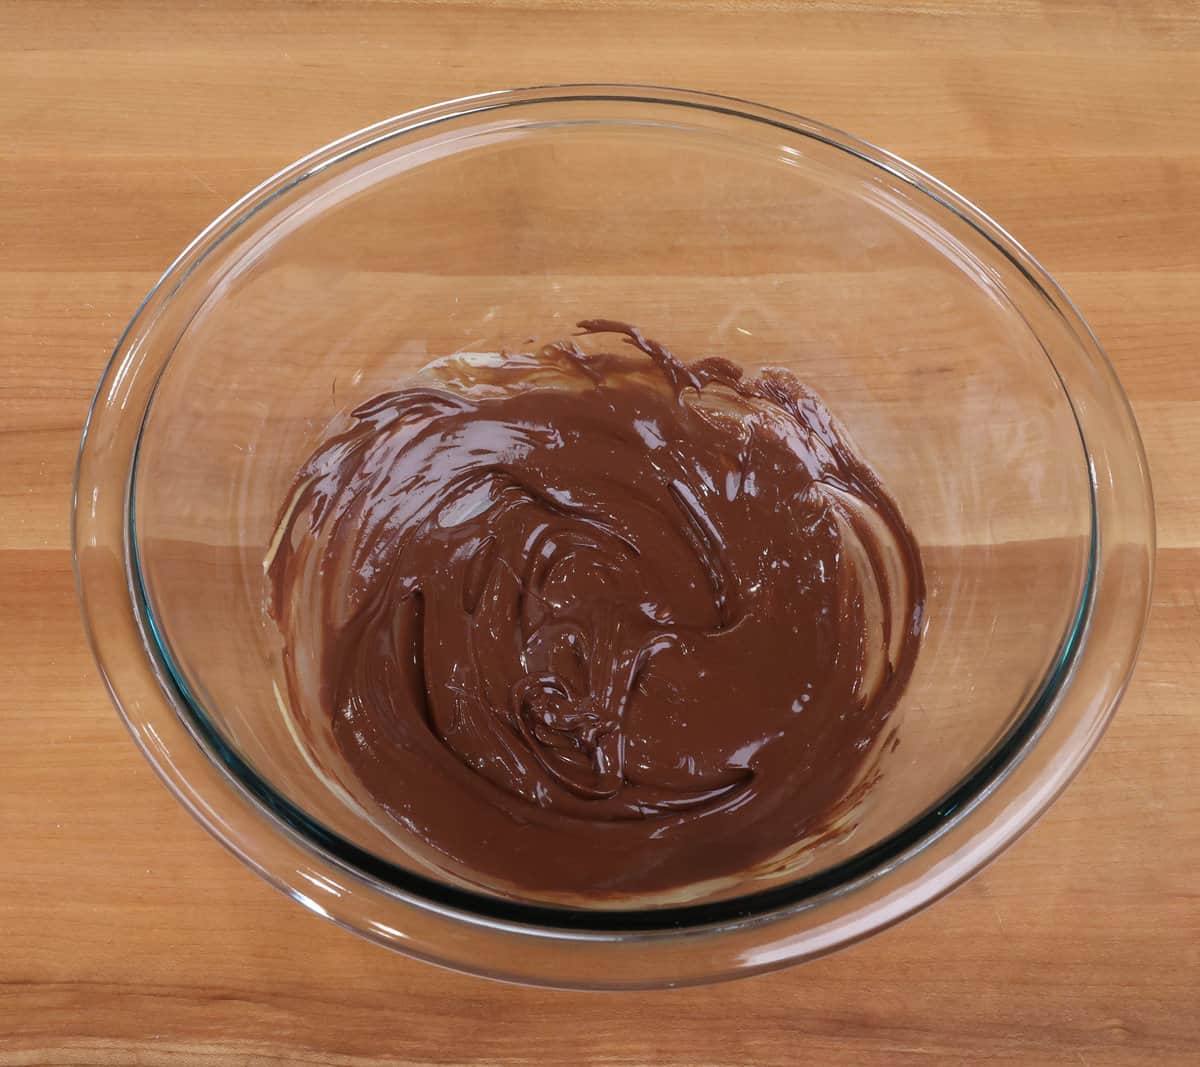 melted chocolate and peanut butter in a bowl.